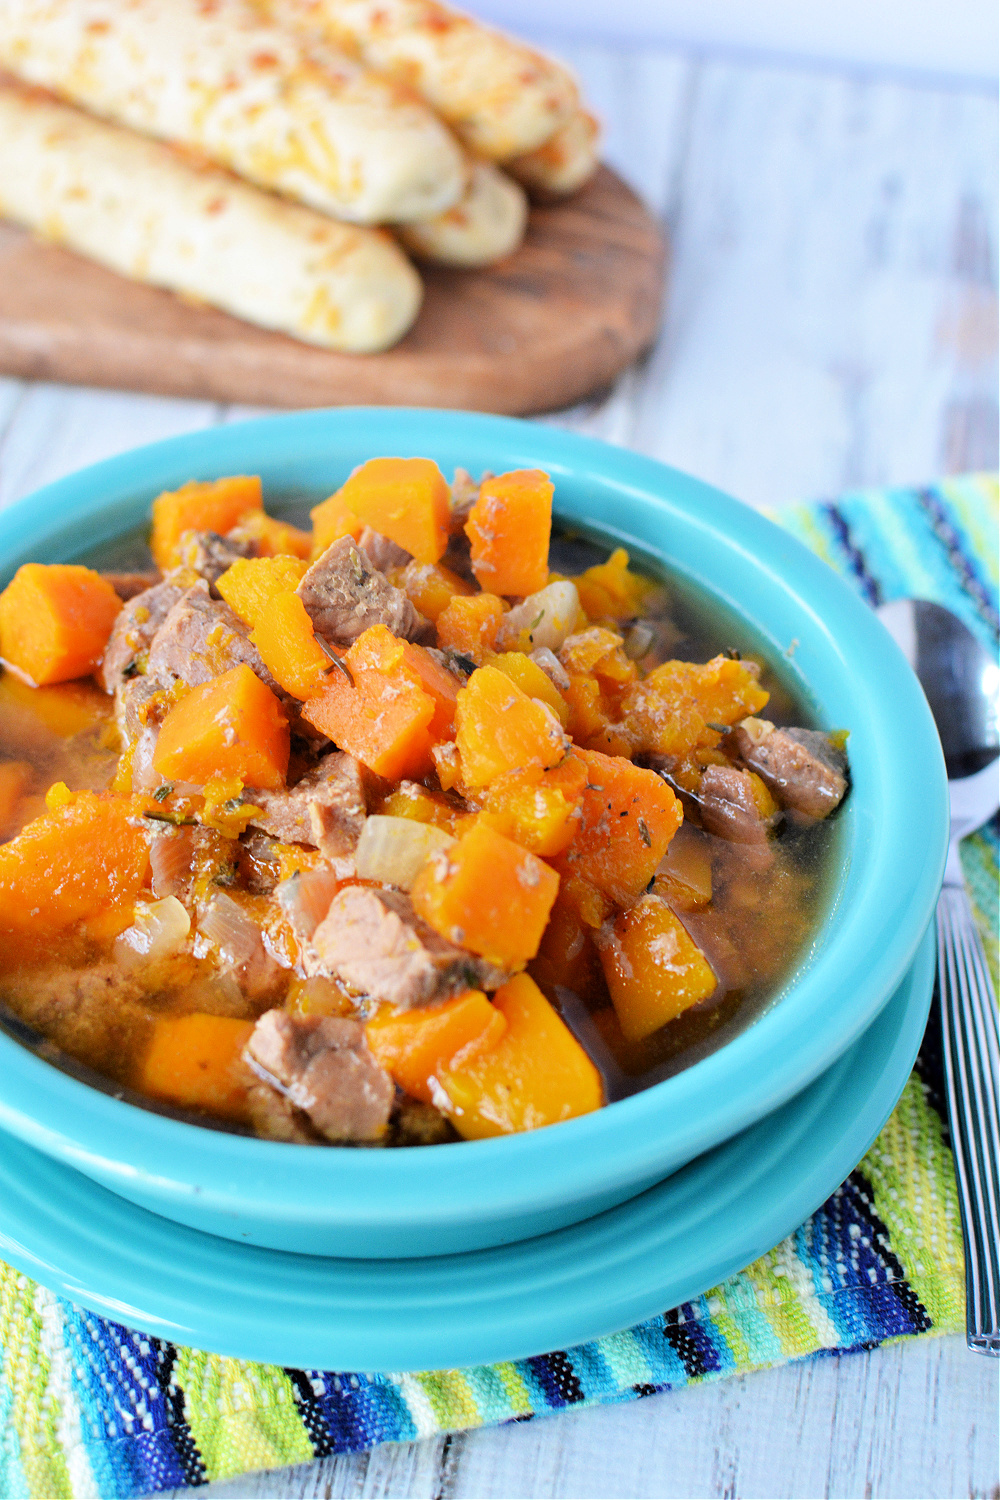 Slow Cooker Beef and Sweet Potato Stew Recipe